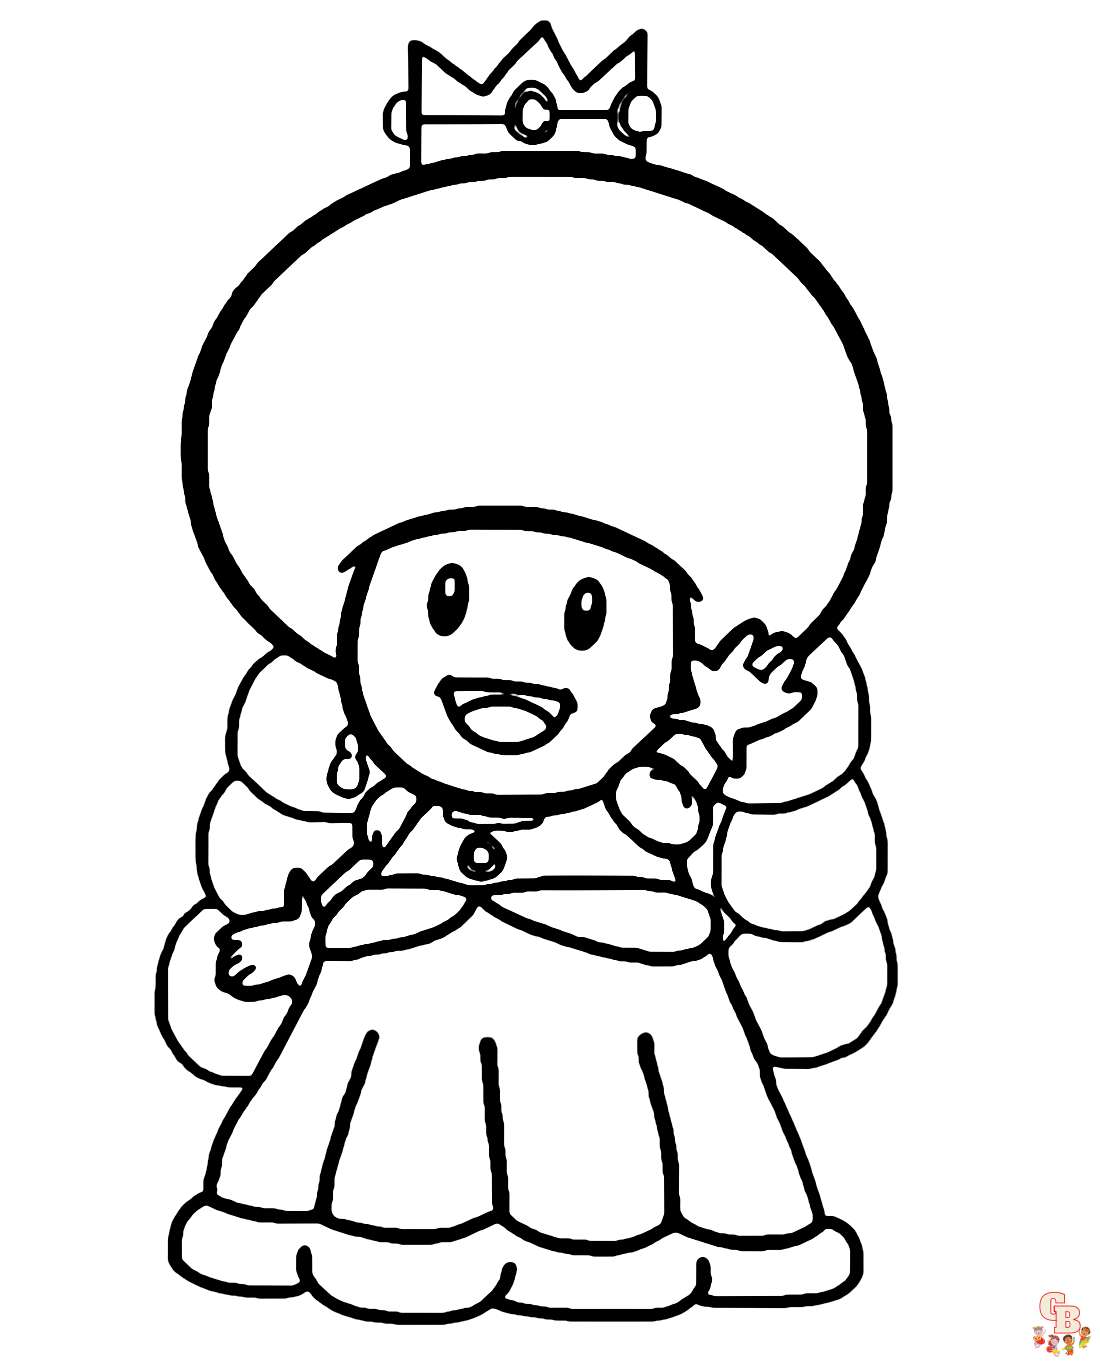 toadette coloring pages free